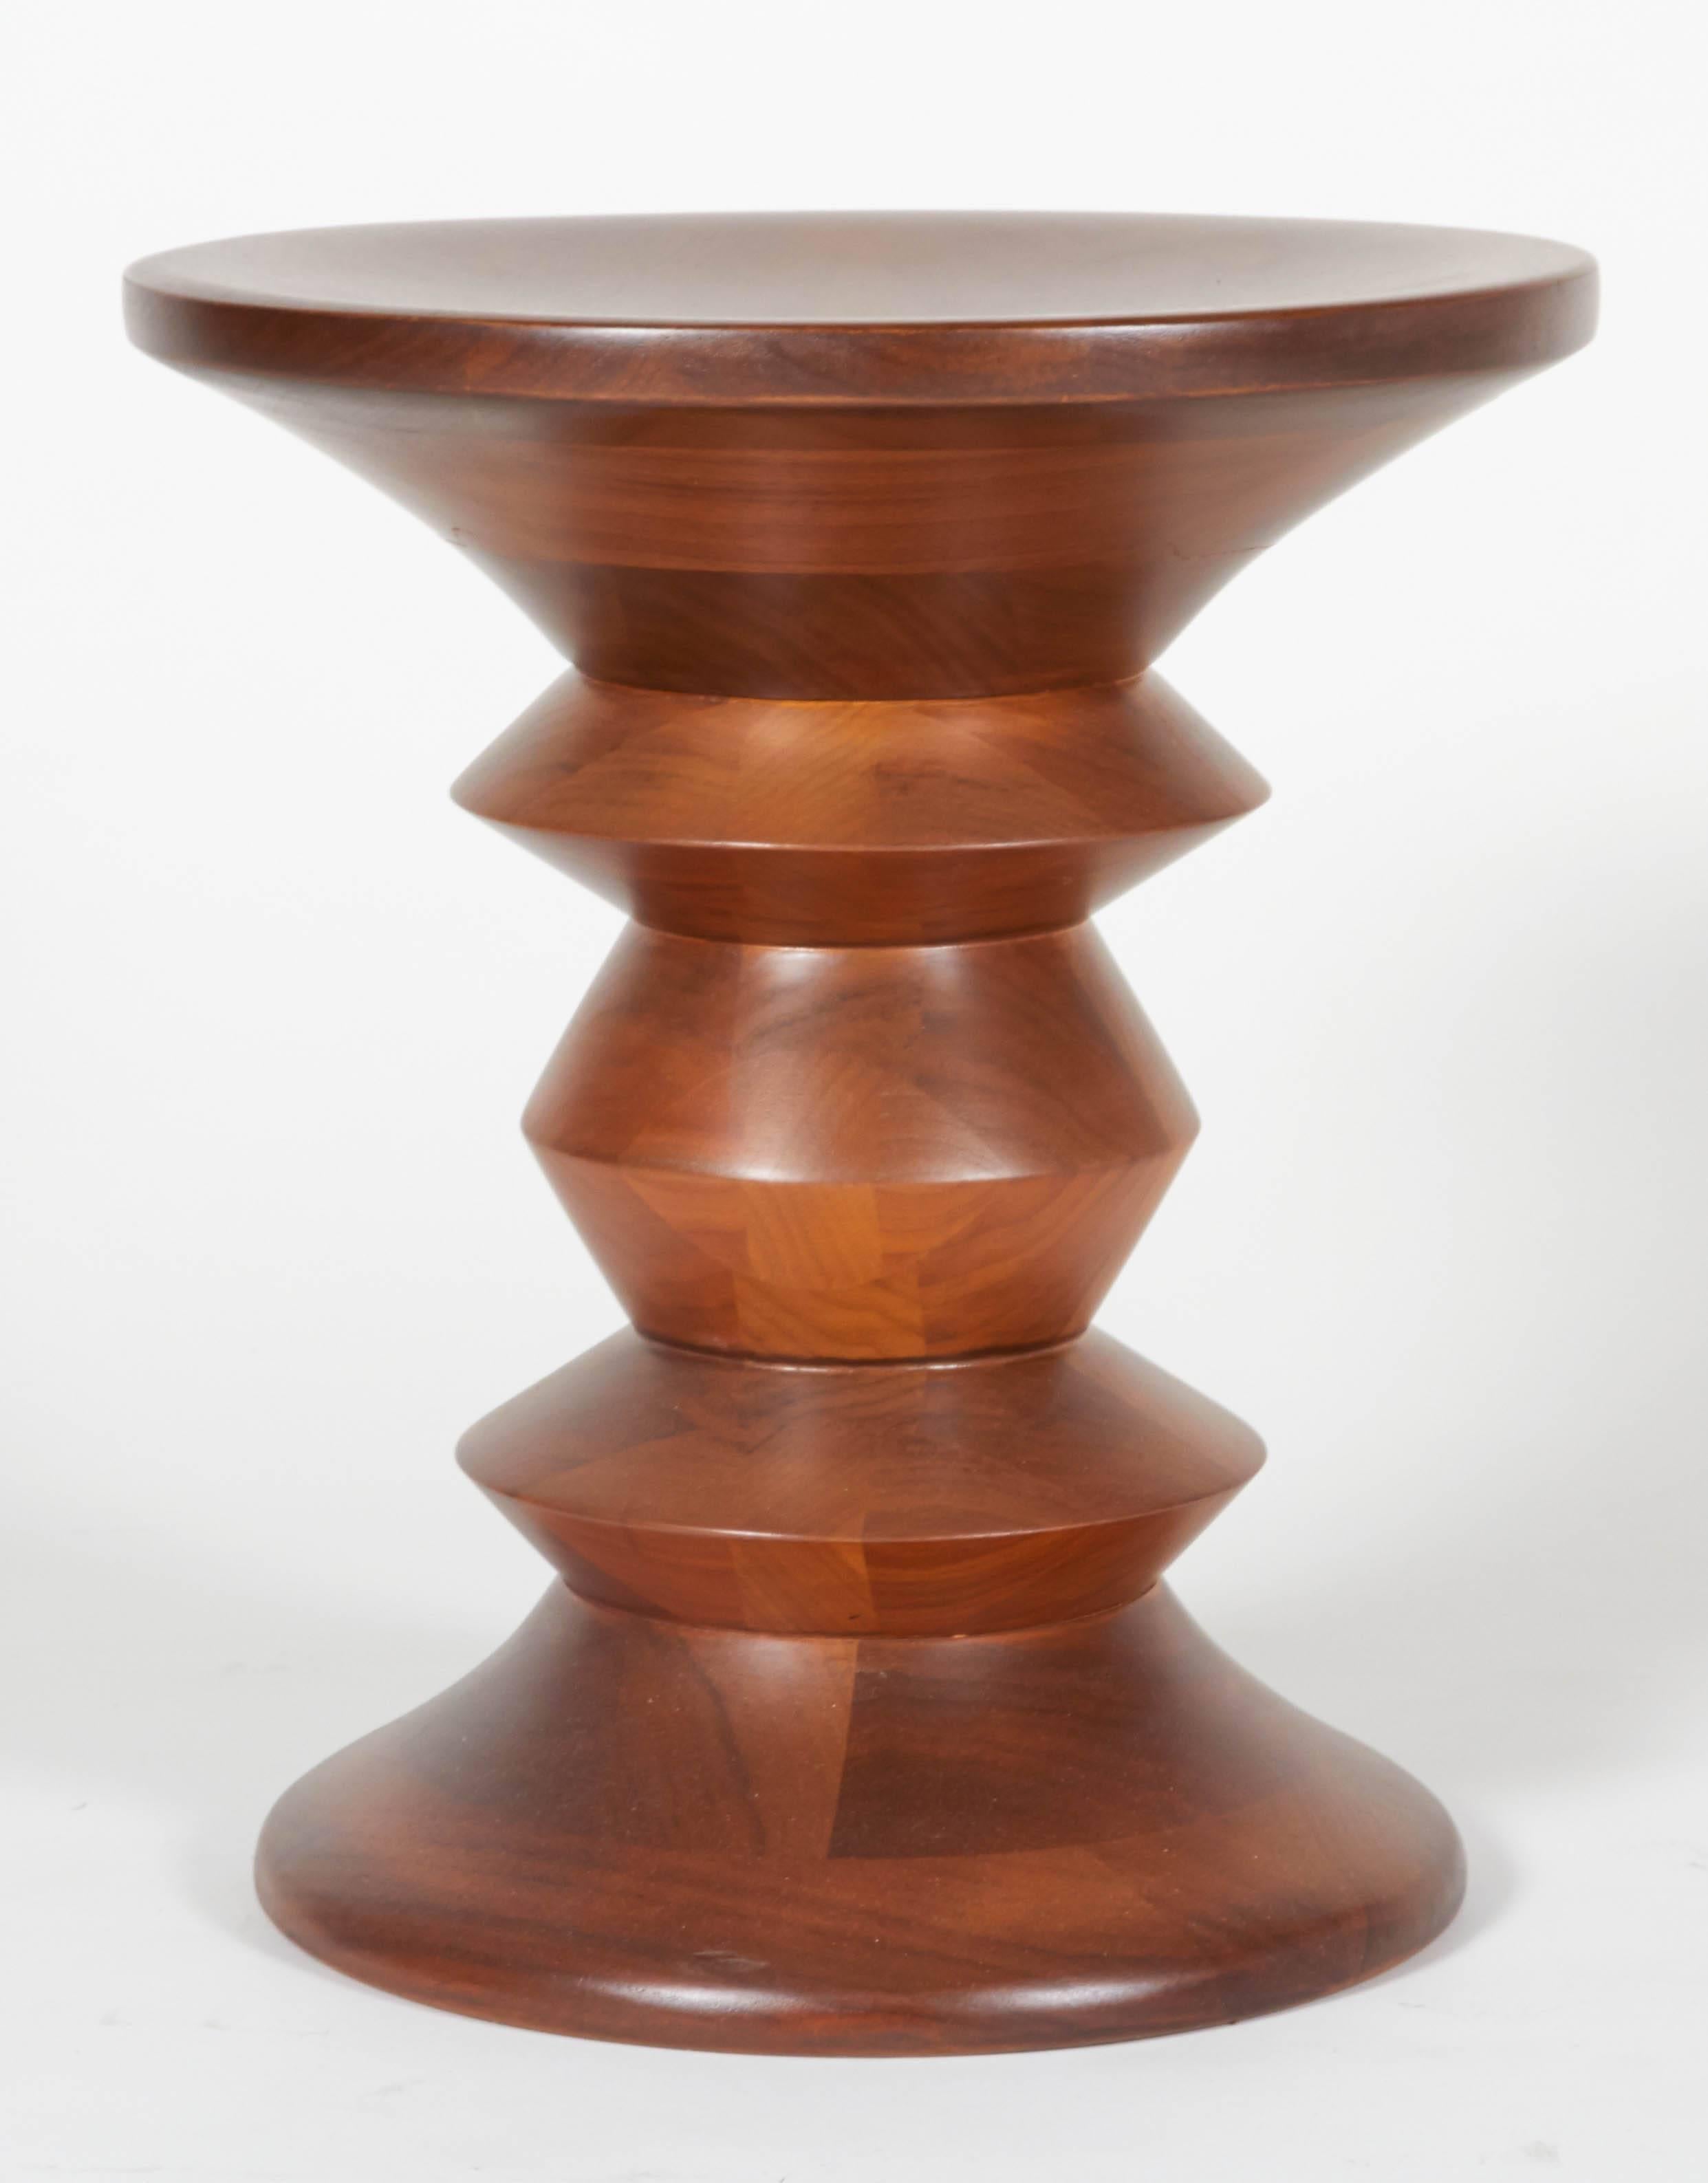 Originally designed for the Time Life lobby at the Rockefeller Center by Charles and Ray Eames. The sculptural walnut form is composed of blocks of solid Walnut.  A functional and decorative design element that can fulfill a variety of interior